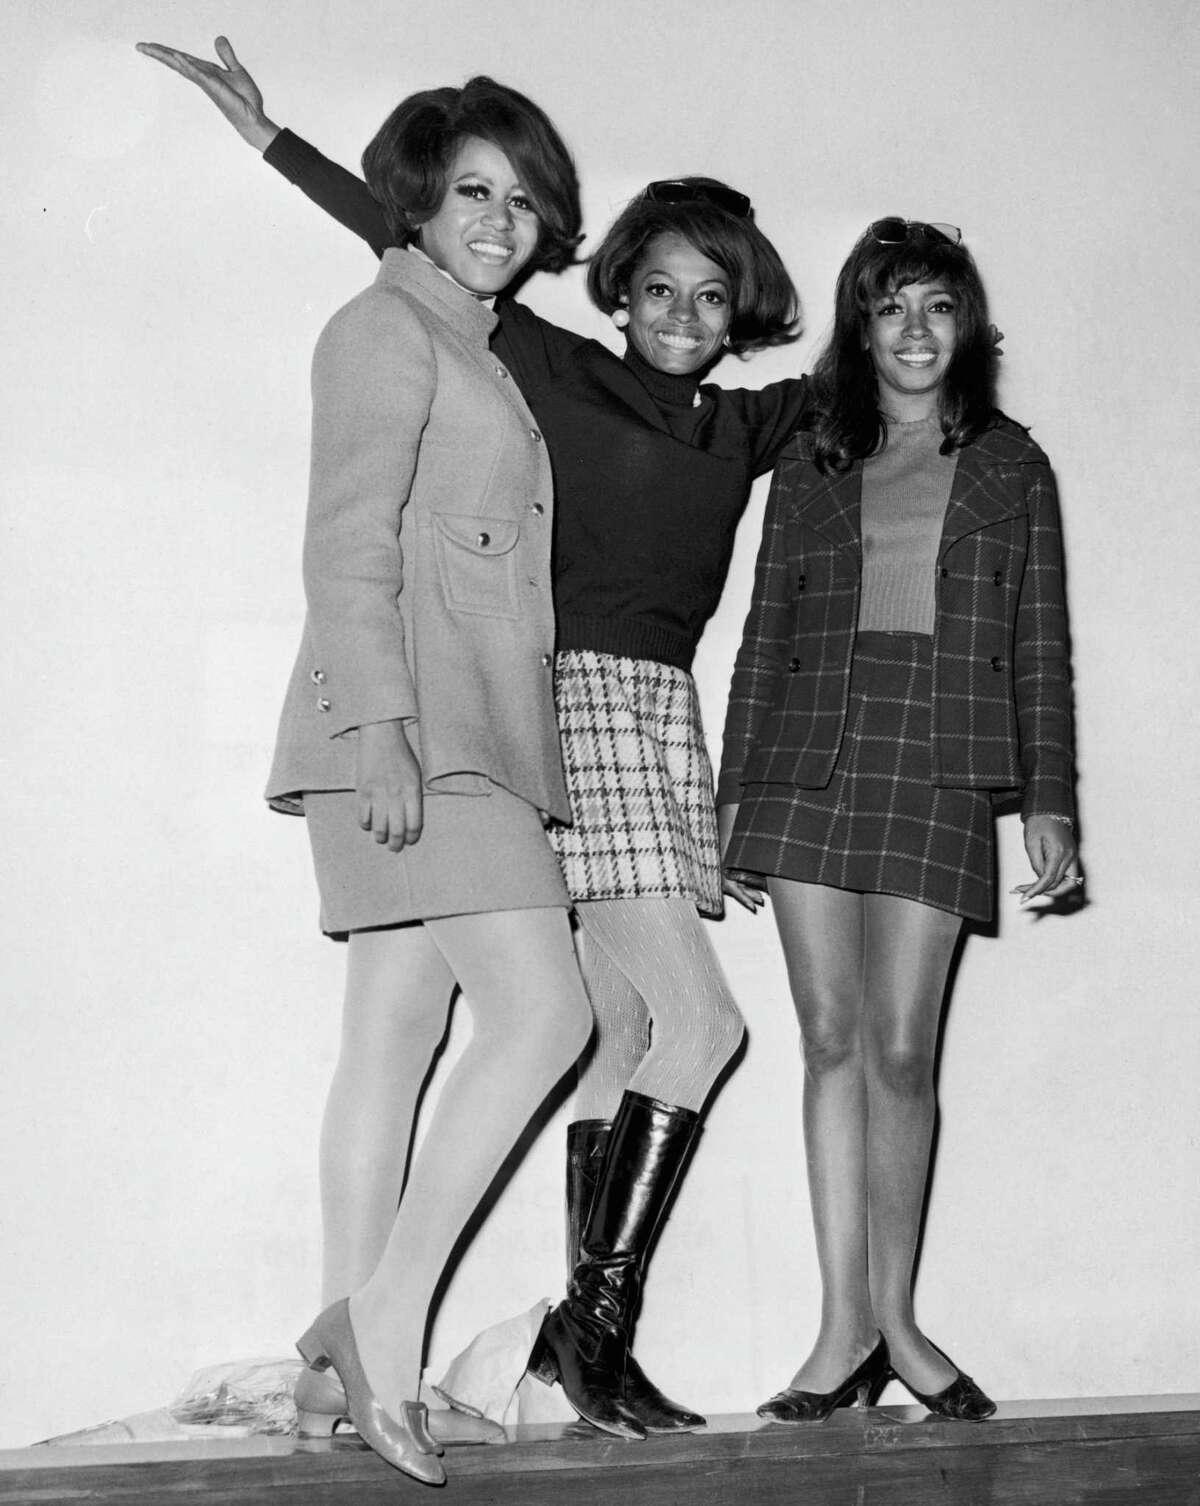 Your Heart Belongs to Me 1962 This was The Supremes' first chart hit, only making it to No. 95 on the Billboard Hot 100. But it foreshadowed a legendary run of hits.